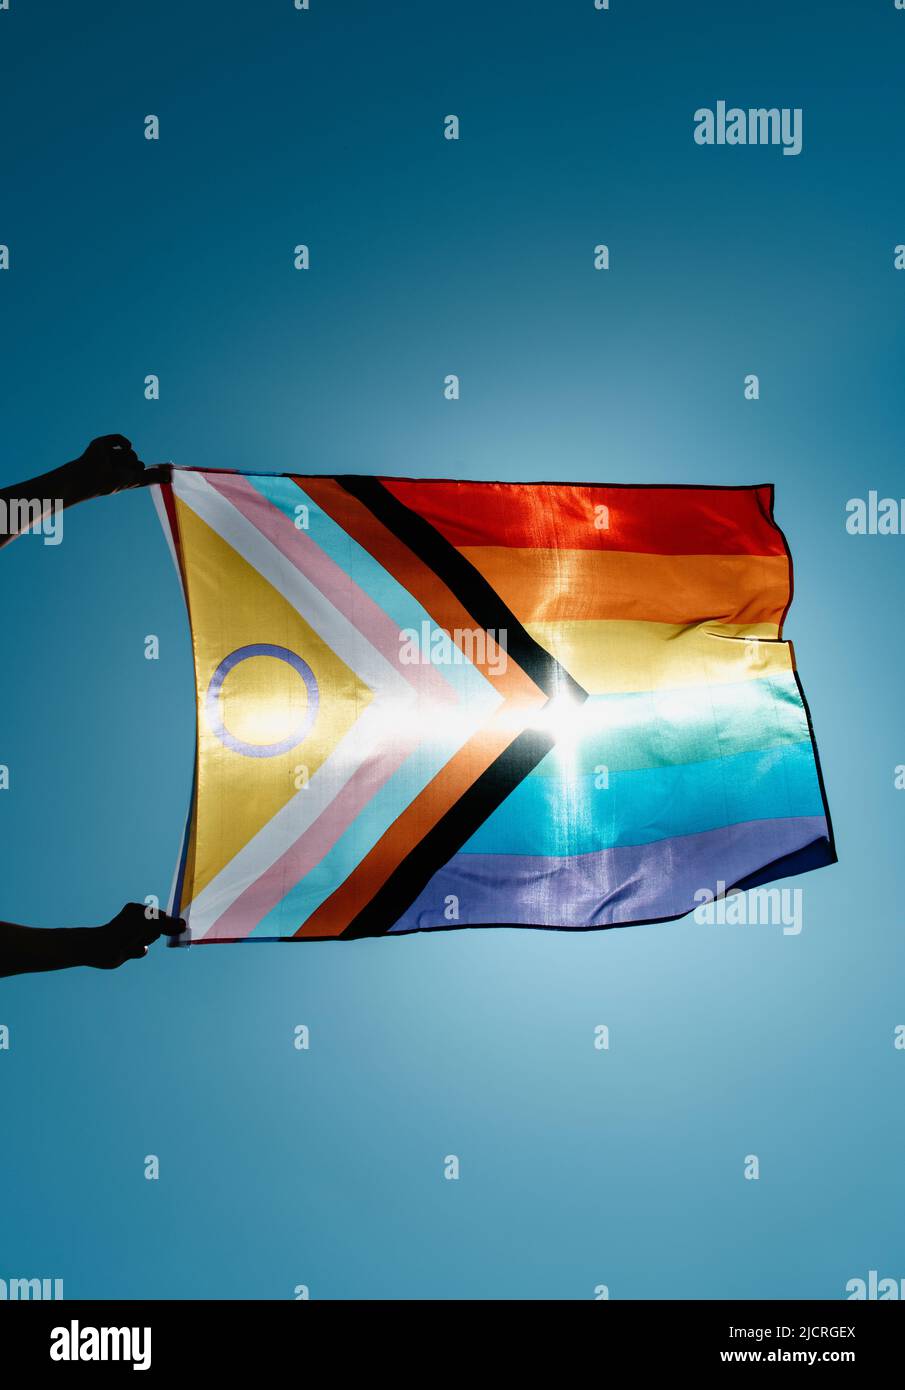 closeup of a man waving an intersex-inclusive progress pride flag in the air on the blue sky, with the sun in the background Stock Photo